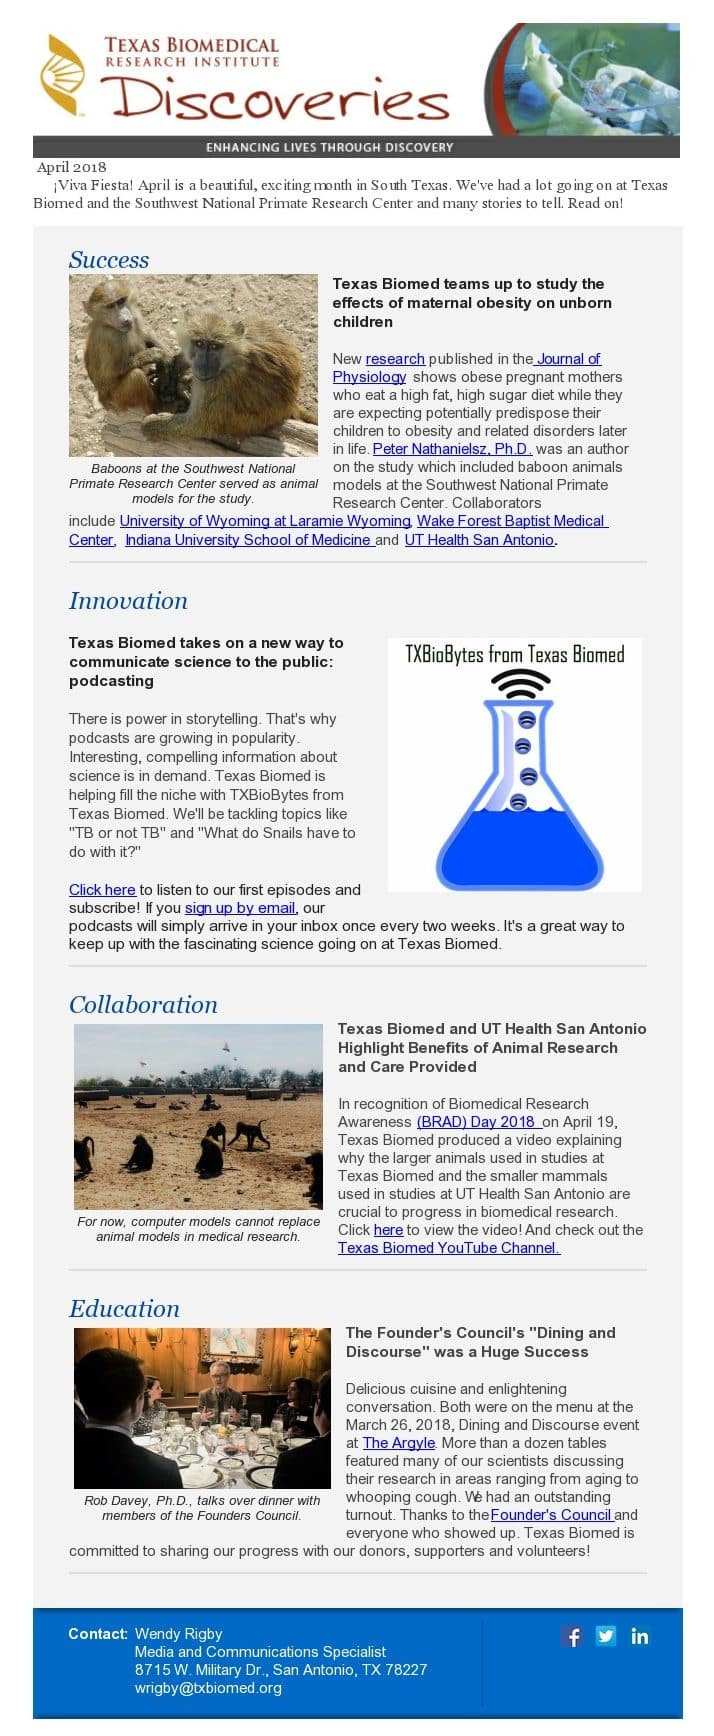 Texas Biomed Discoveries Enewsletter April 2018